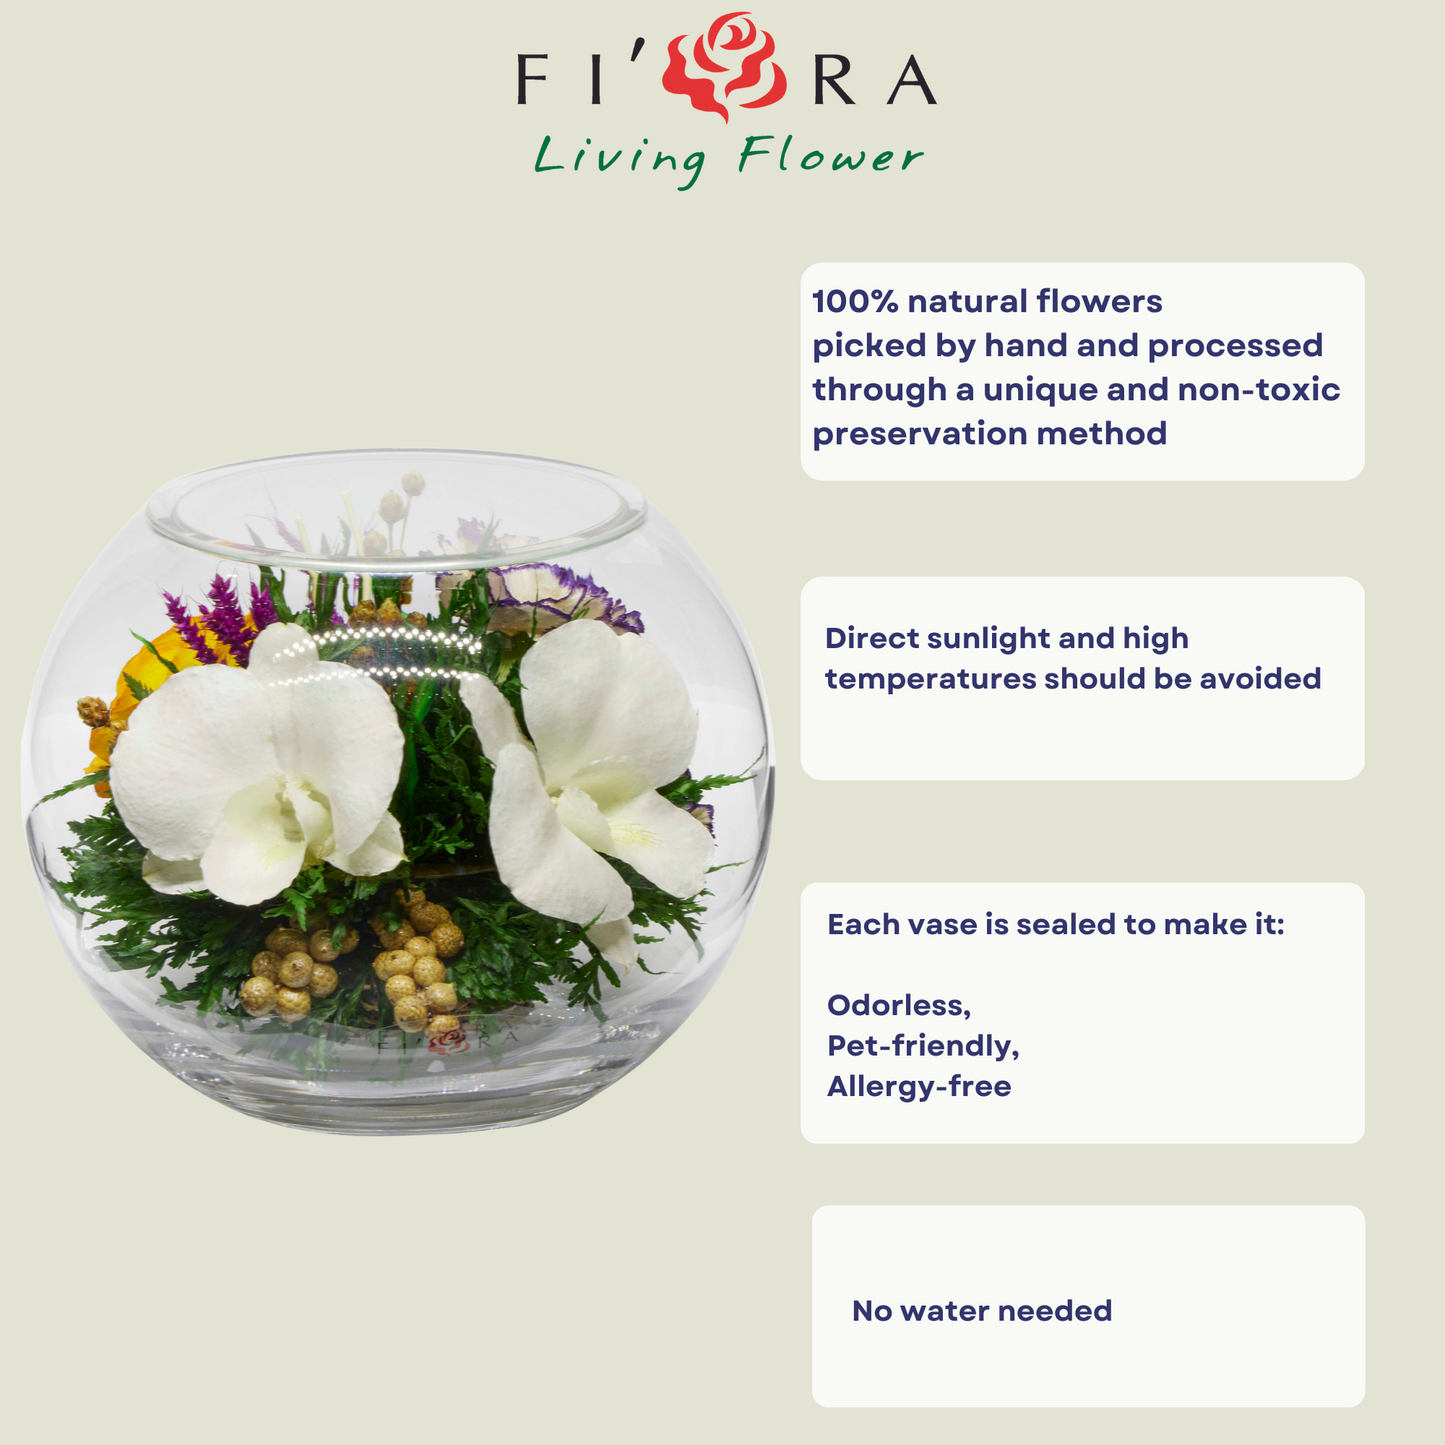 71874 Long-Lasting White Orchids and rose in a Round Glass Vase